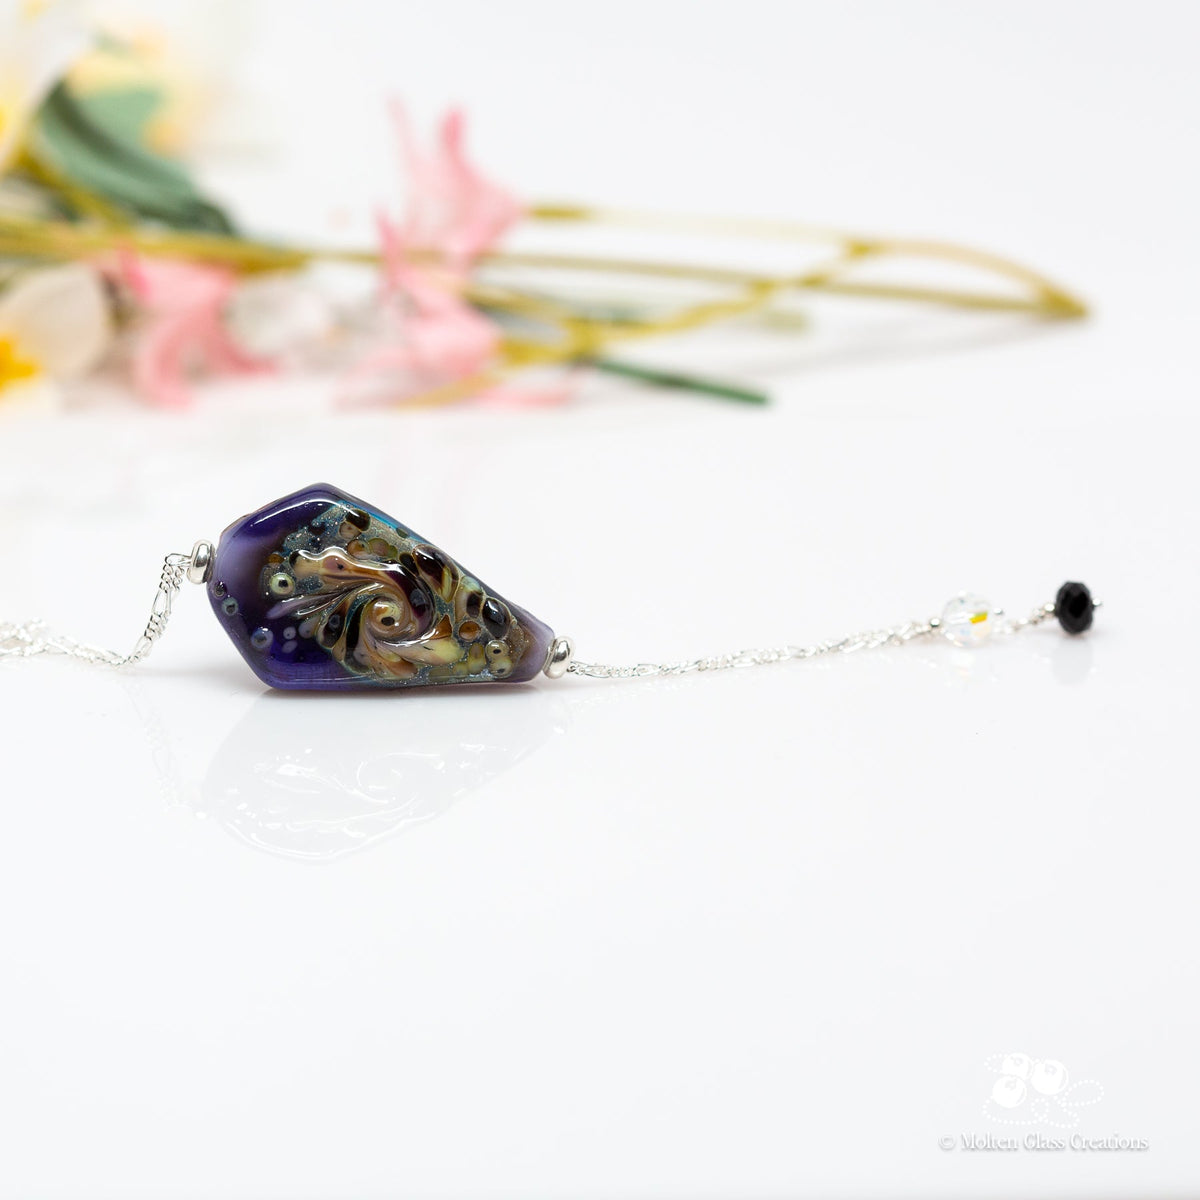 Fly a Kite - Purple Necklace - Molten Glass Creations